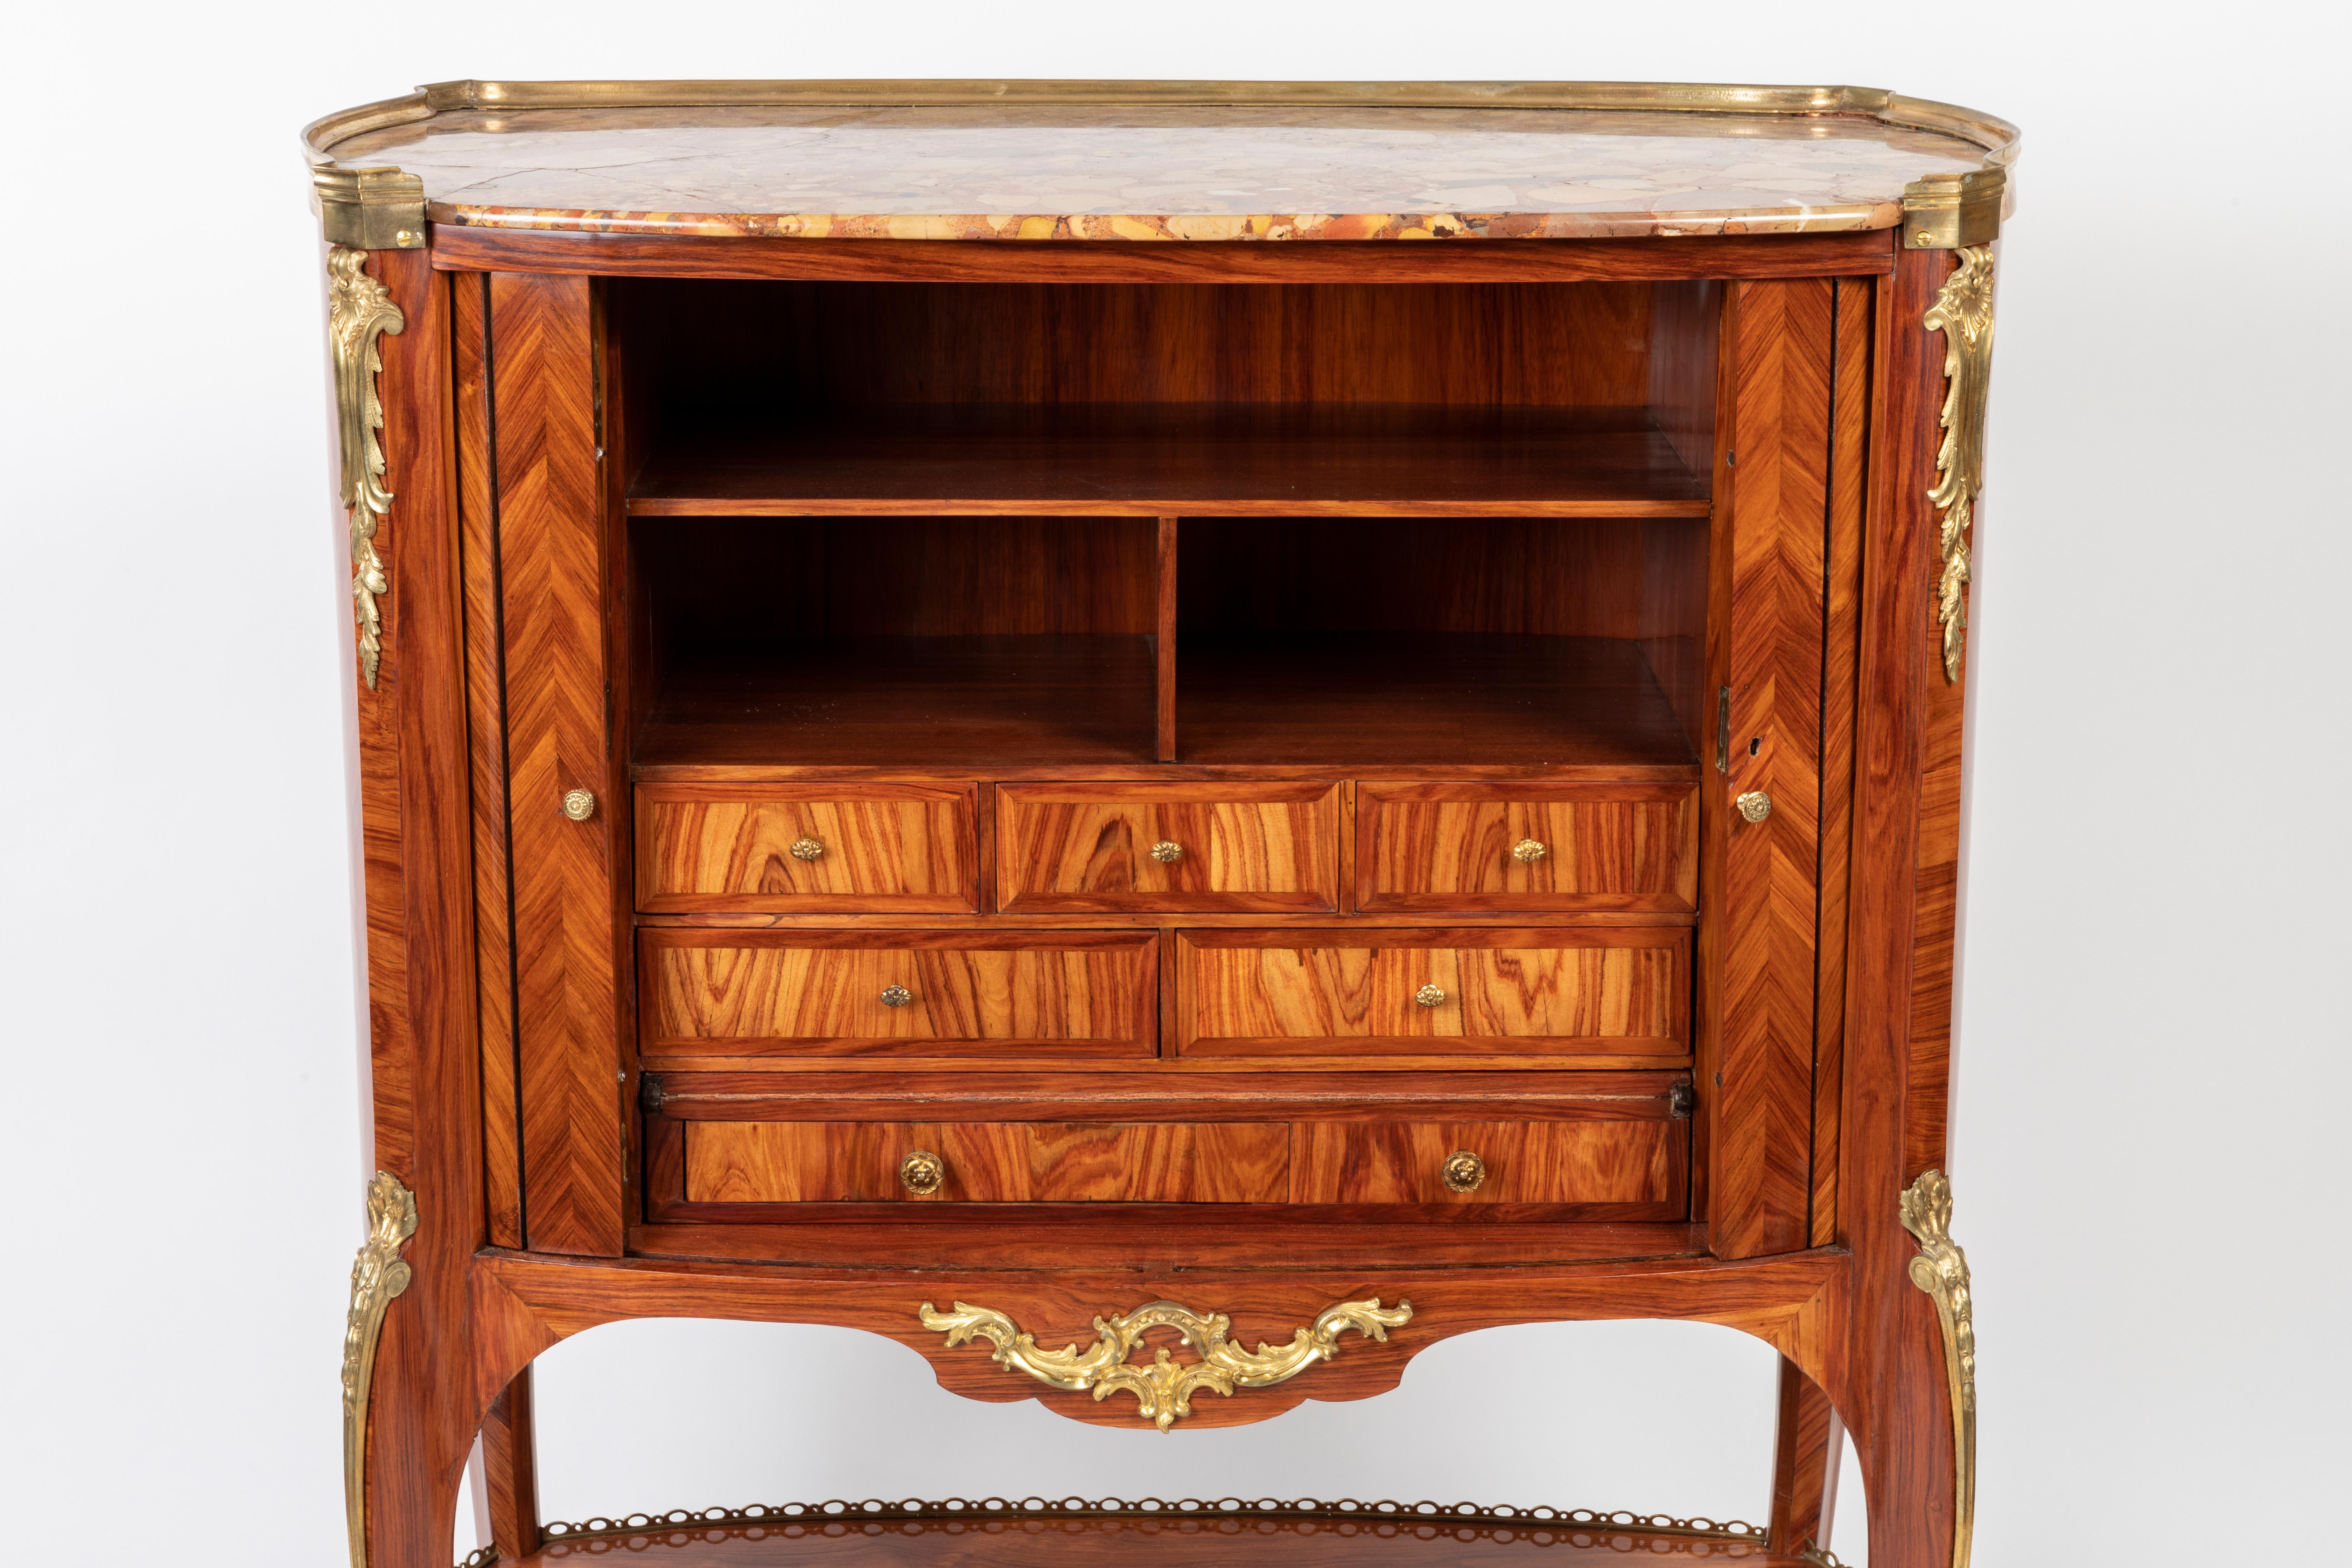 Veneer French 18th C. Louis XV/XVI Transitional Ormolu Mounted Secretaire by RVLC For Sale